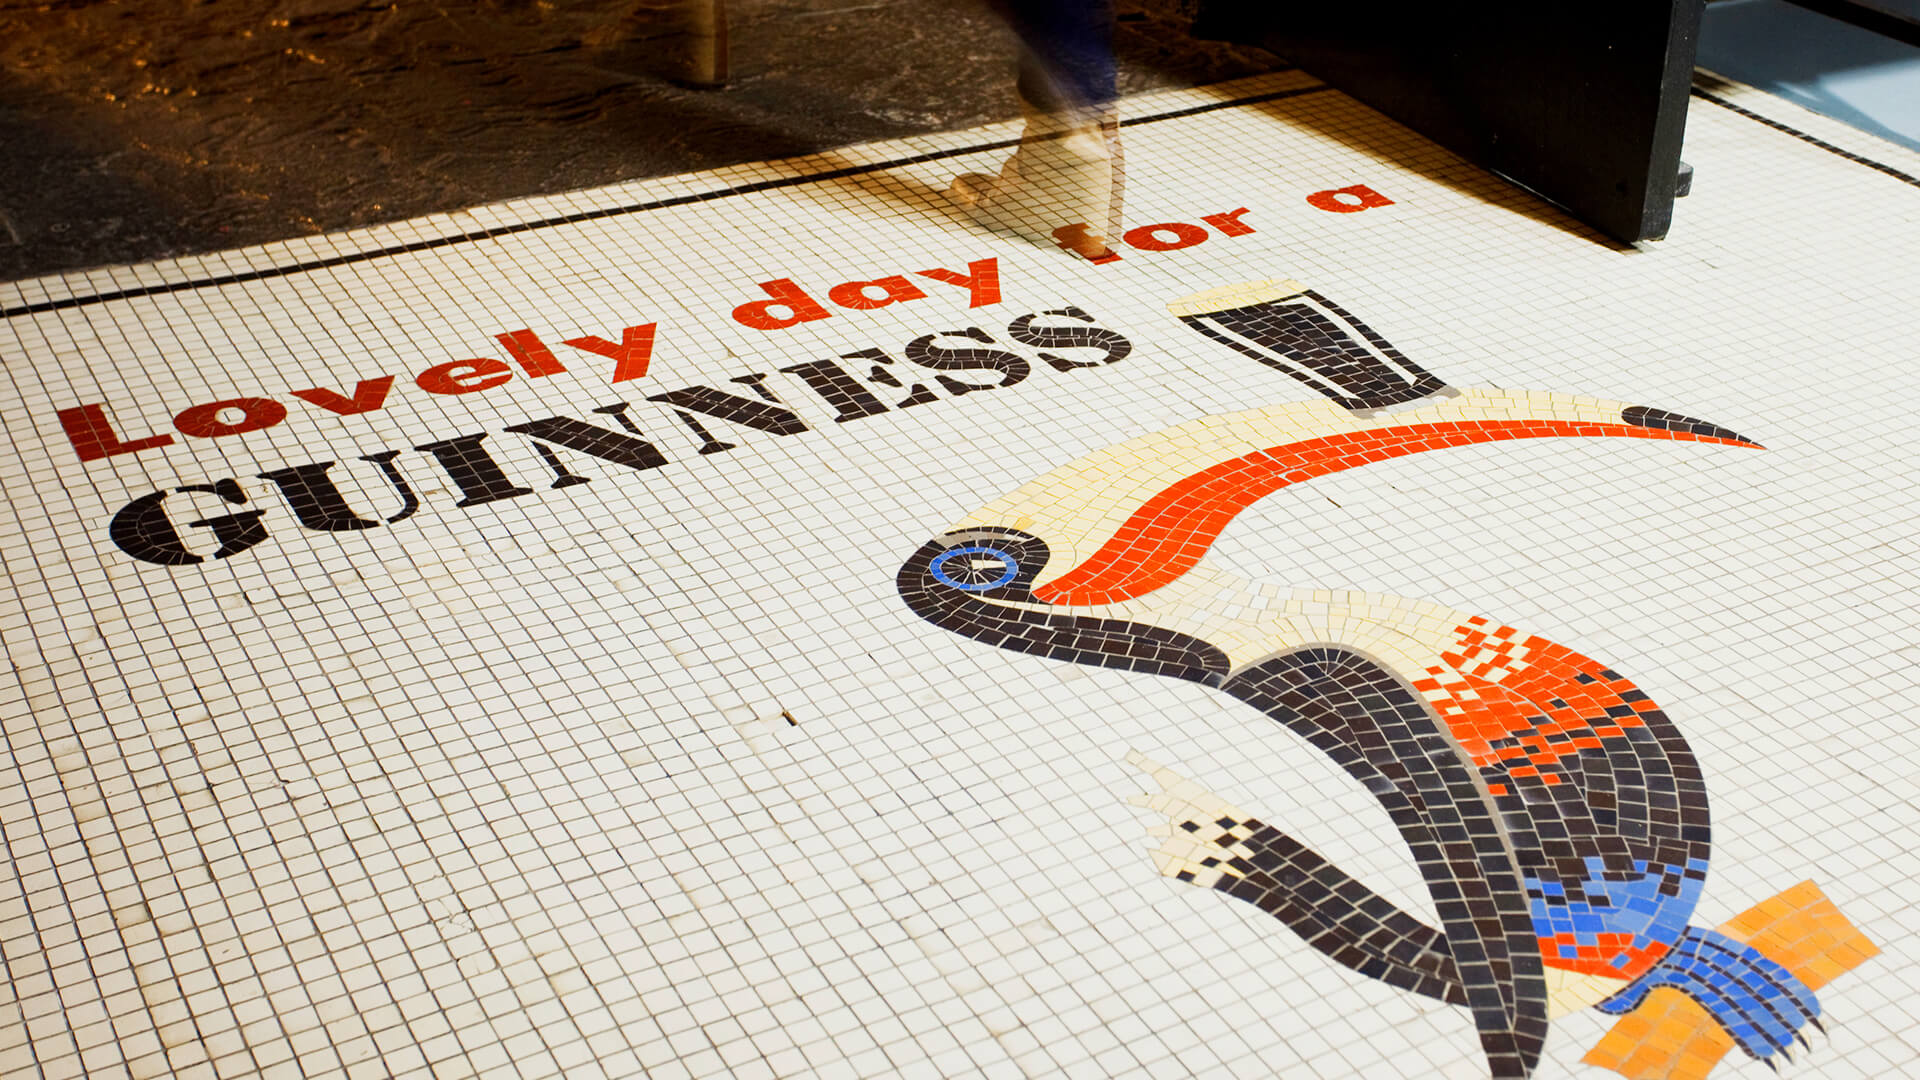 A detailed mosaic floor displaying the famous Guinness Pelican and the text "Lovely day for a Guinness"